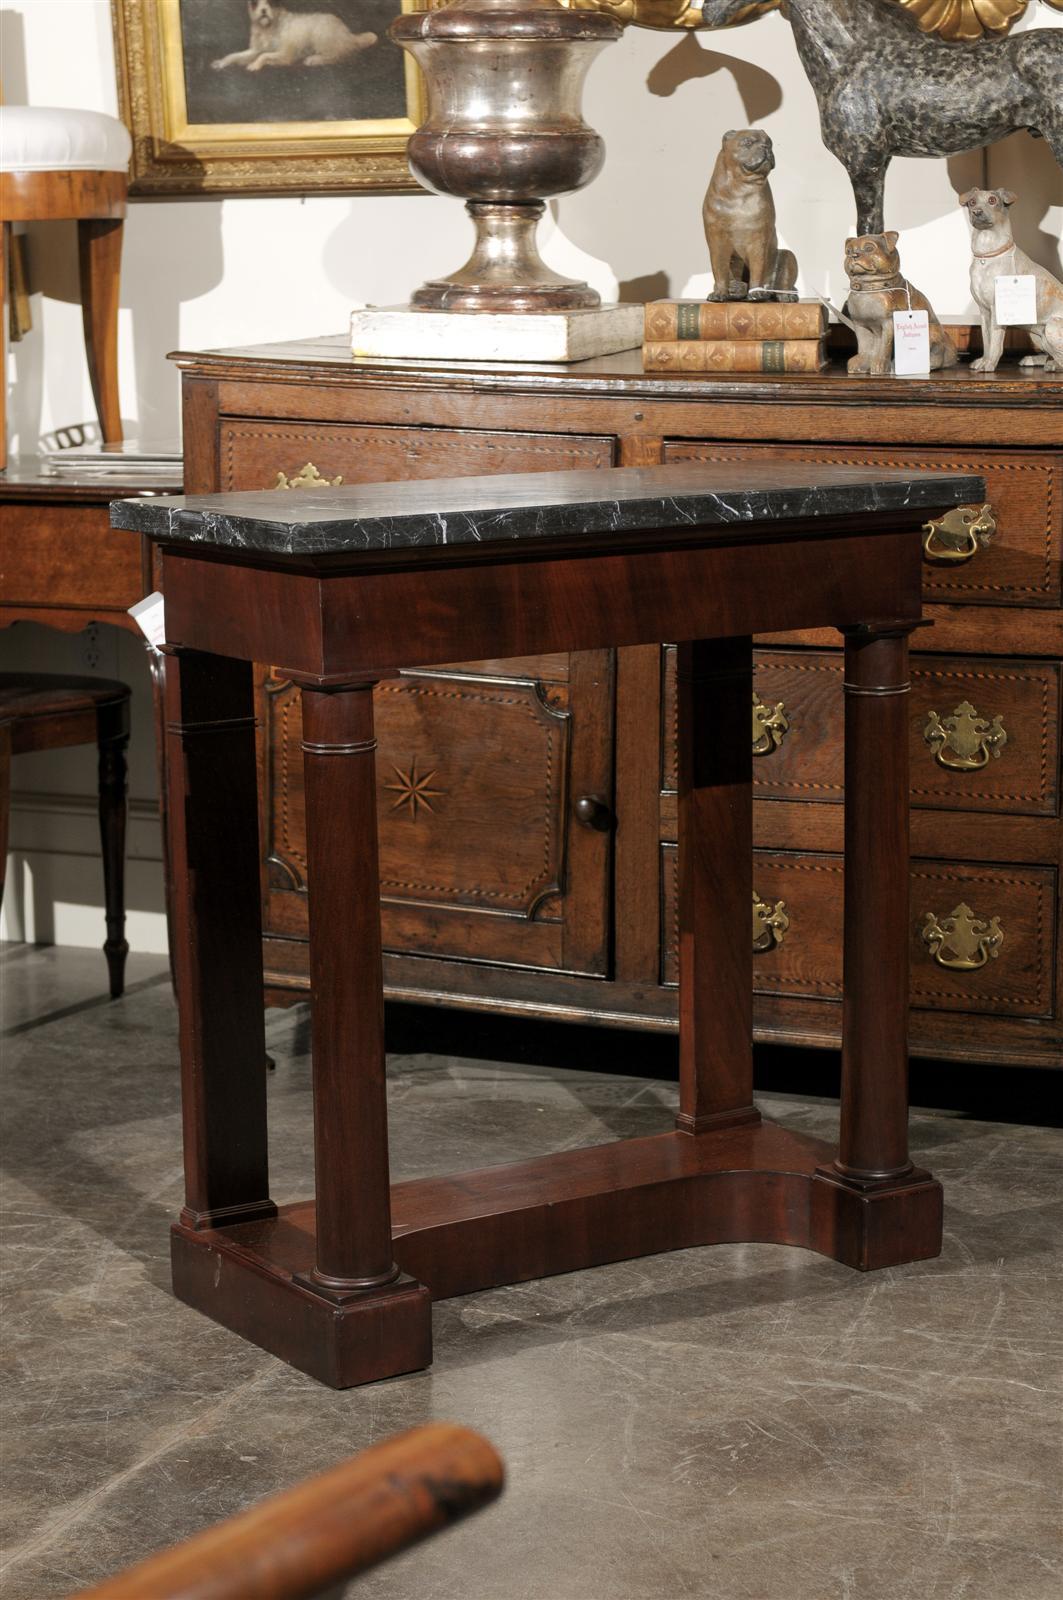 This French Empire style console table from the second half of the 19th century features a rectangular dark grey and white veined marble top over two front columns and back pilasters of Doric style, reminding us of the taste for antiquity of the